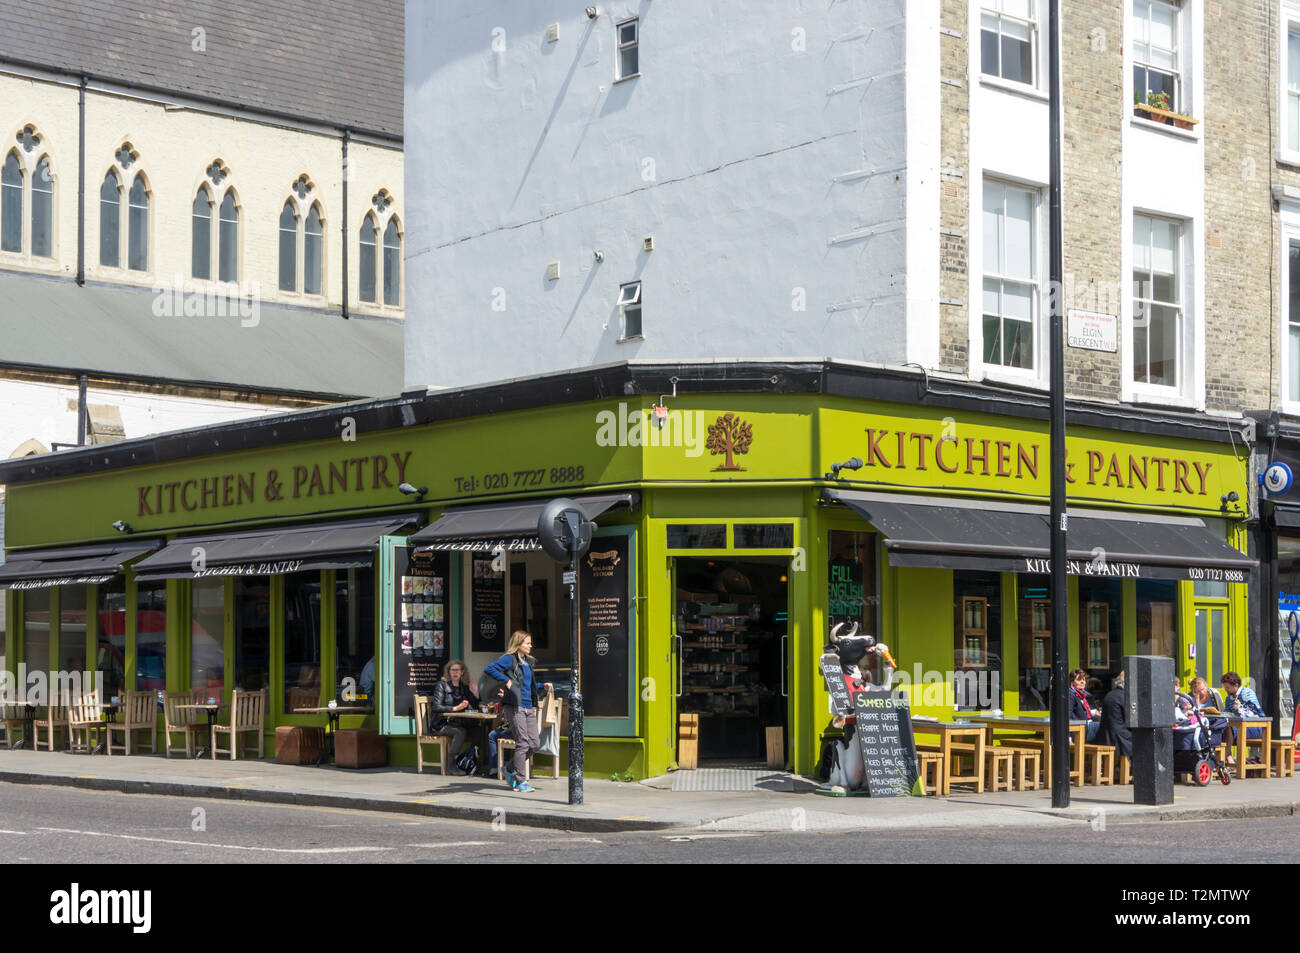 Kitchen & Pantry restaurant in Elgin Crescent, Notting Hill. Stock Photo